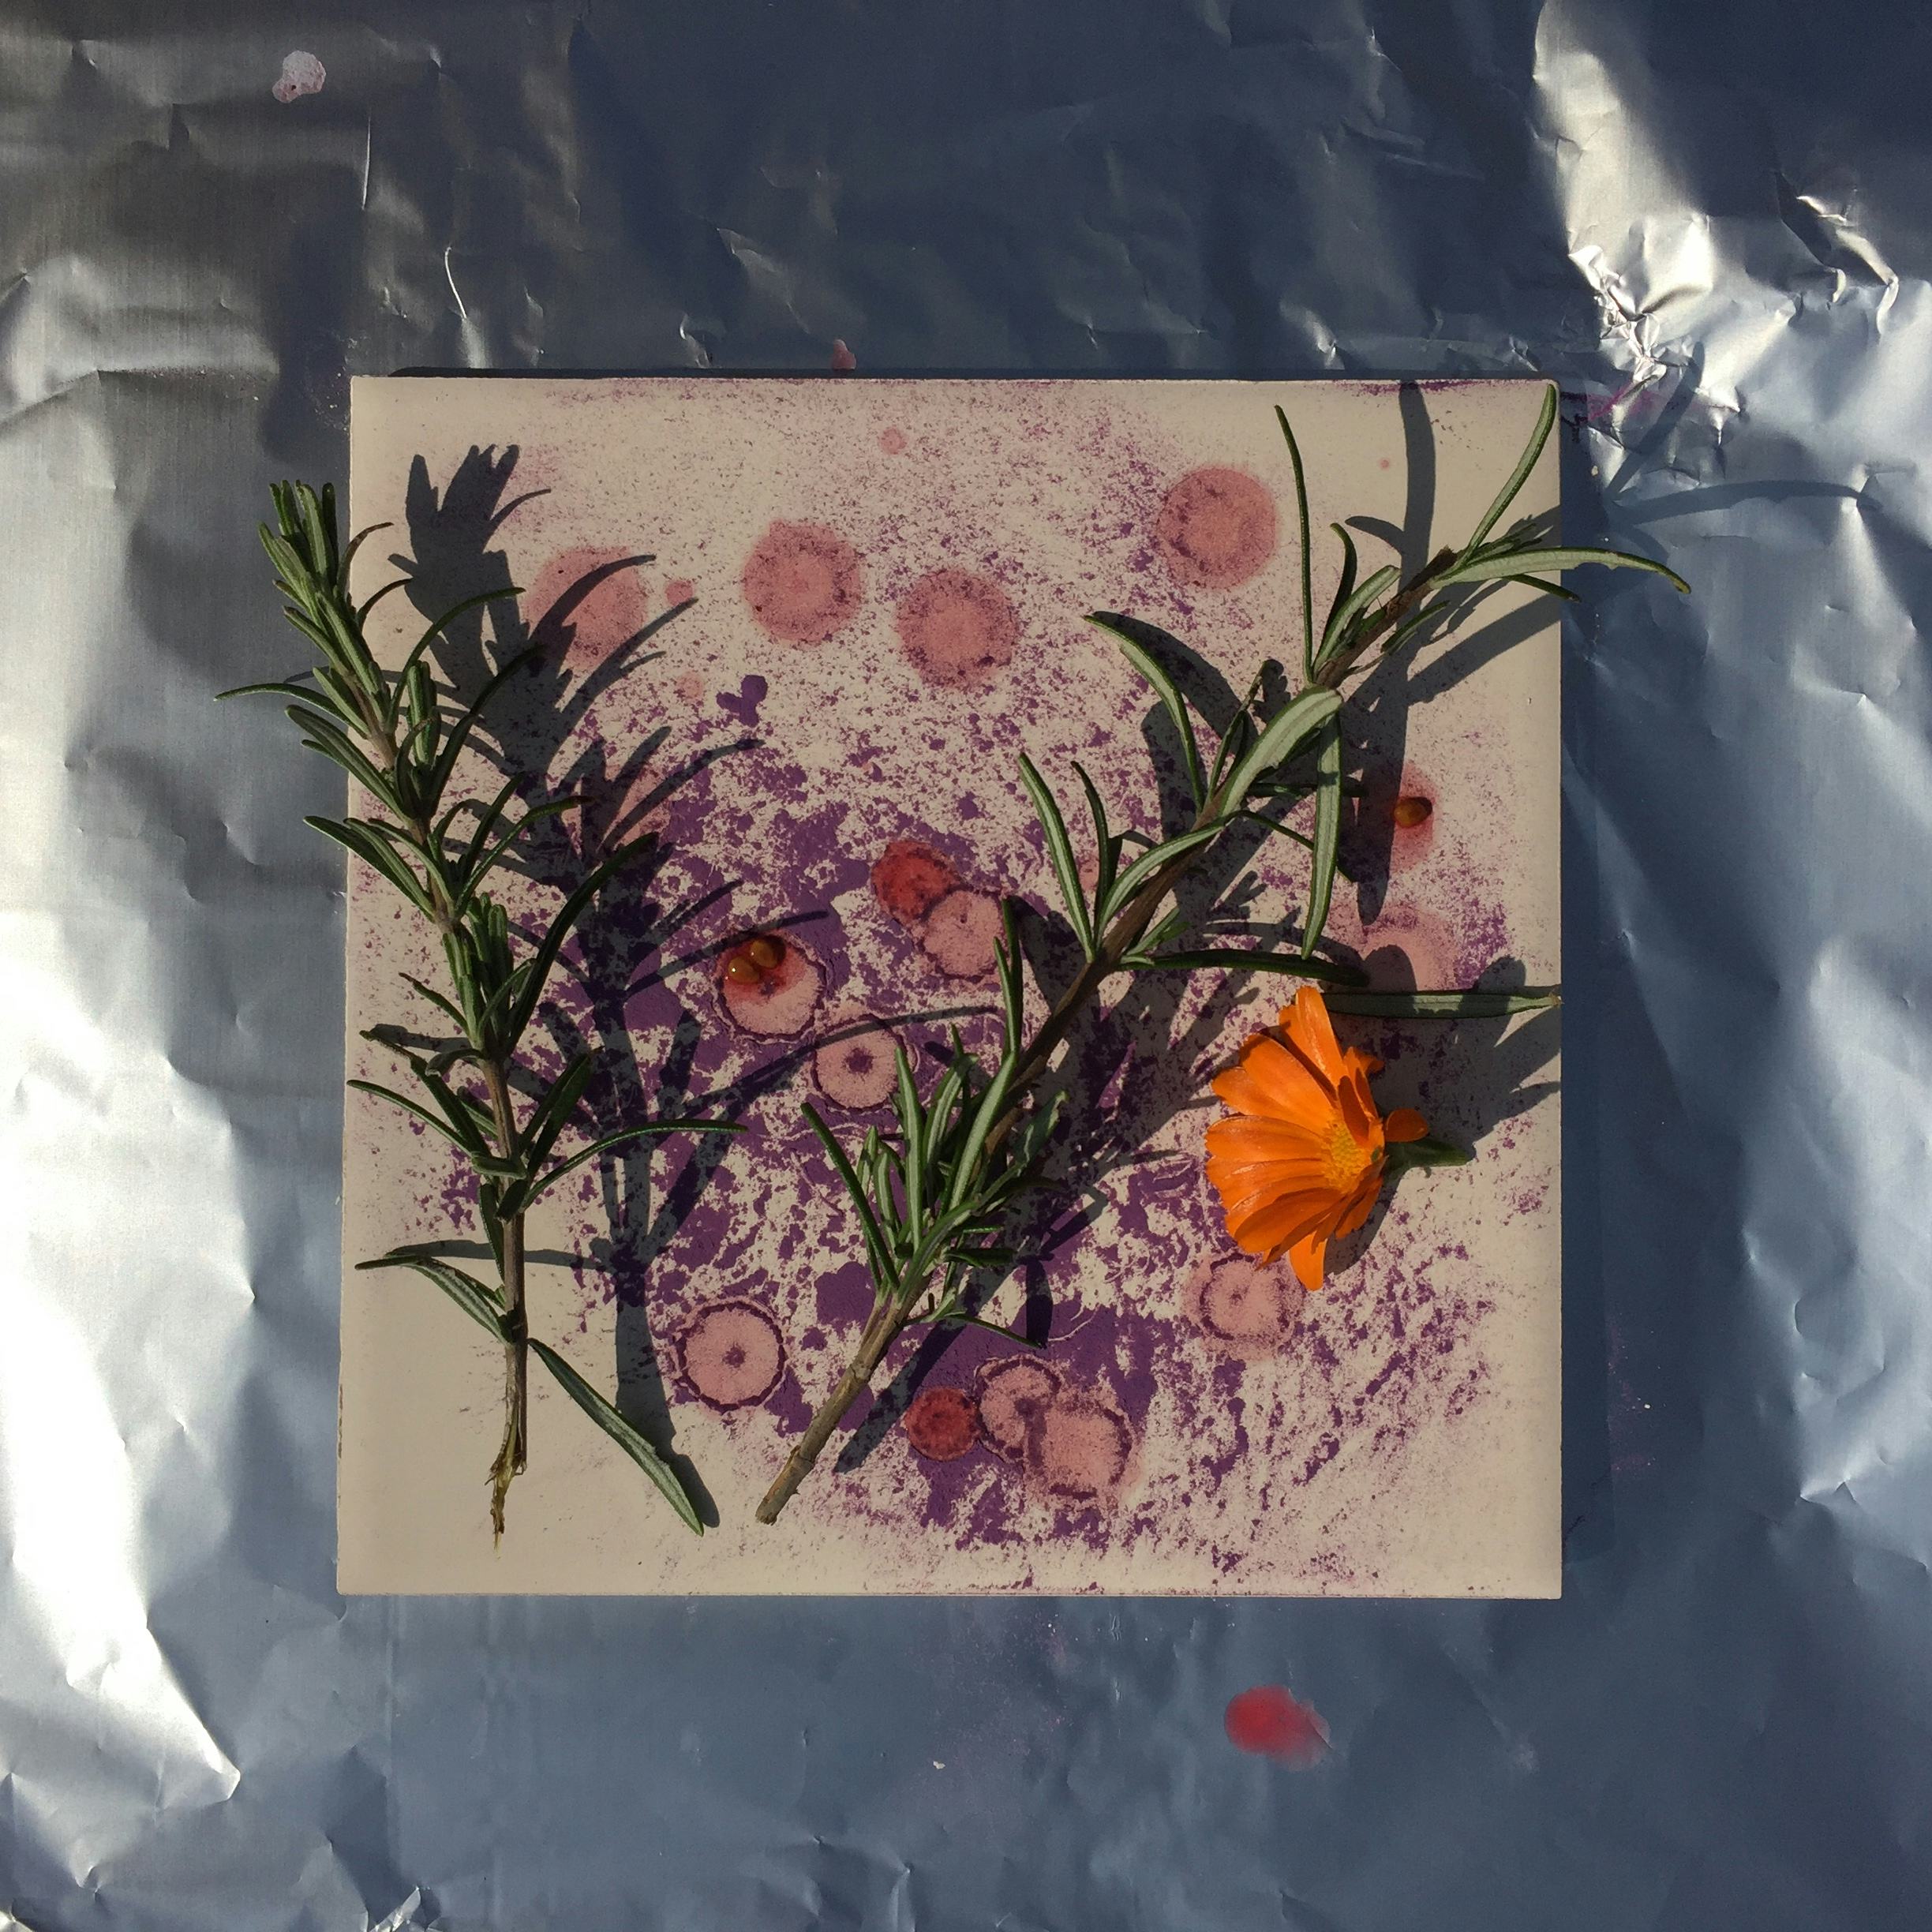 Flower and plant cuttings on top of a clay tile that sits on top of metal foil